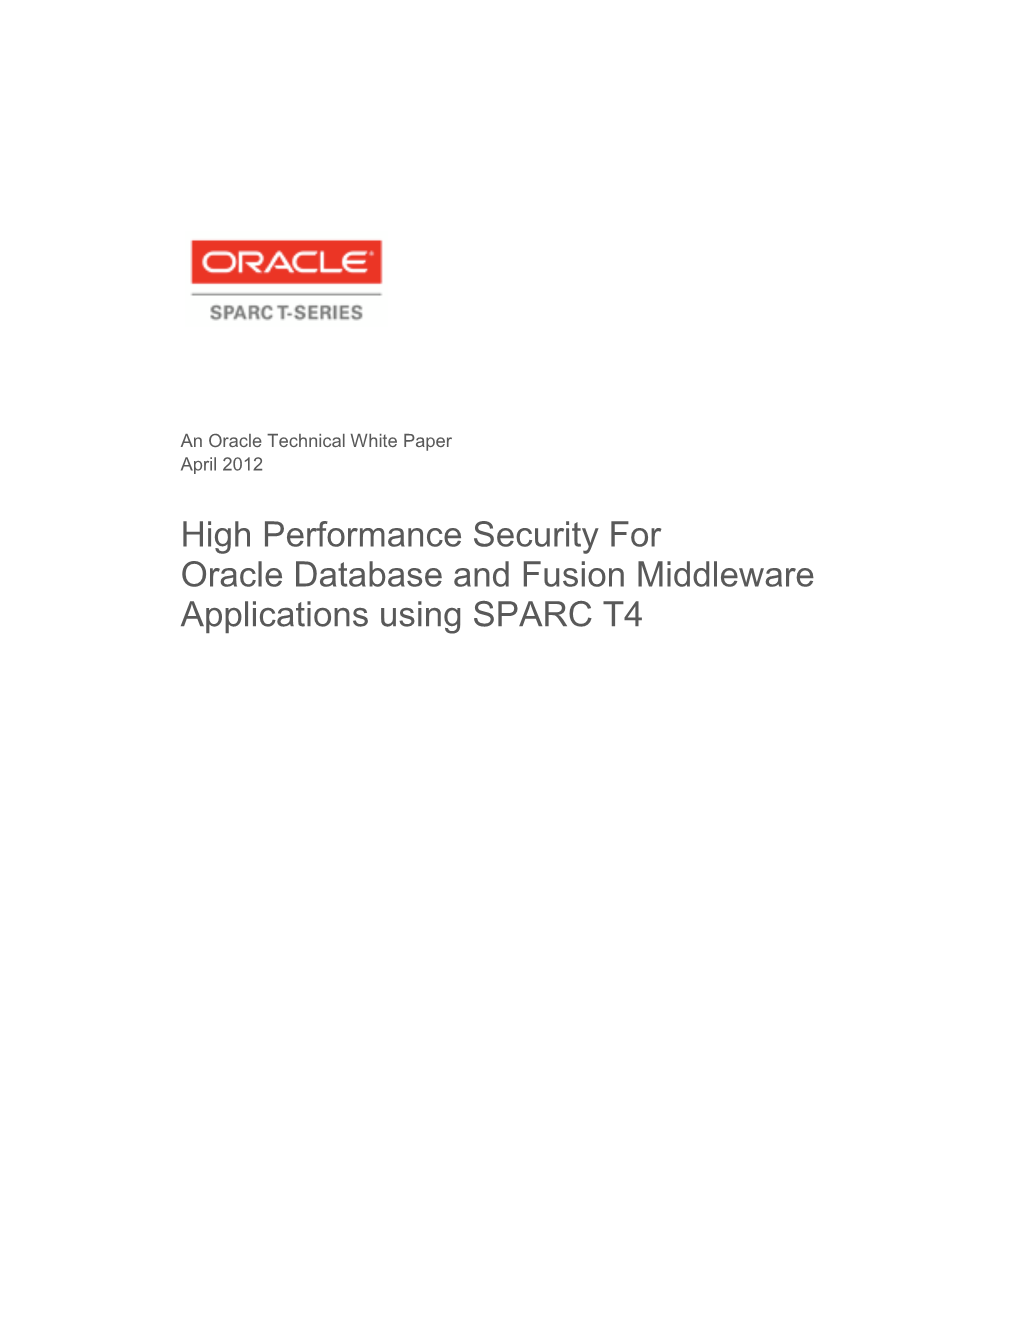 High Performance Security for Oracle Database and Fusion Middleware Applications Using SPARC T4